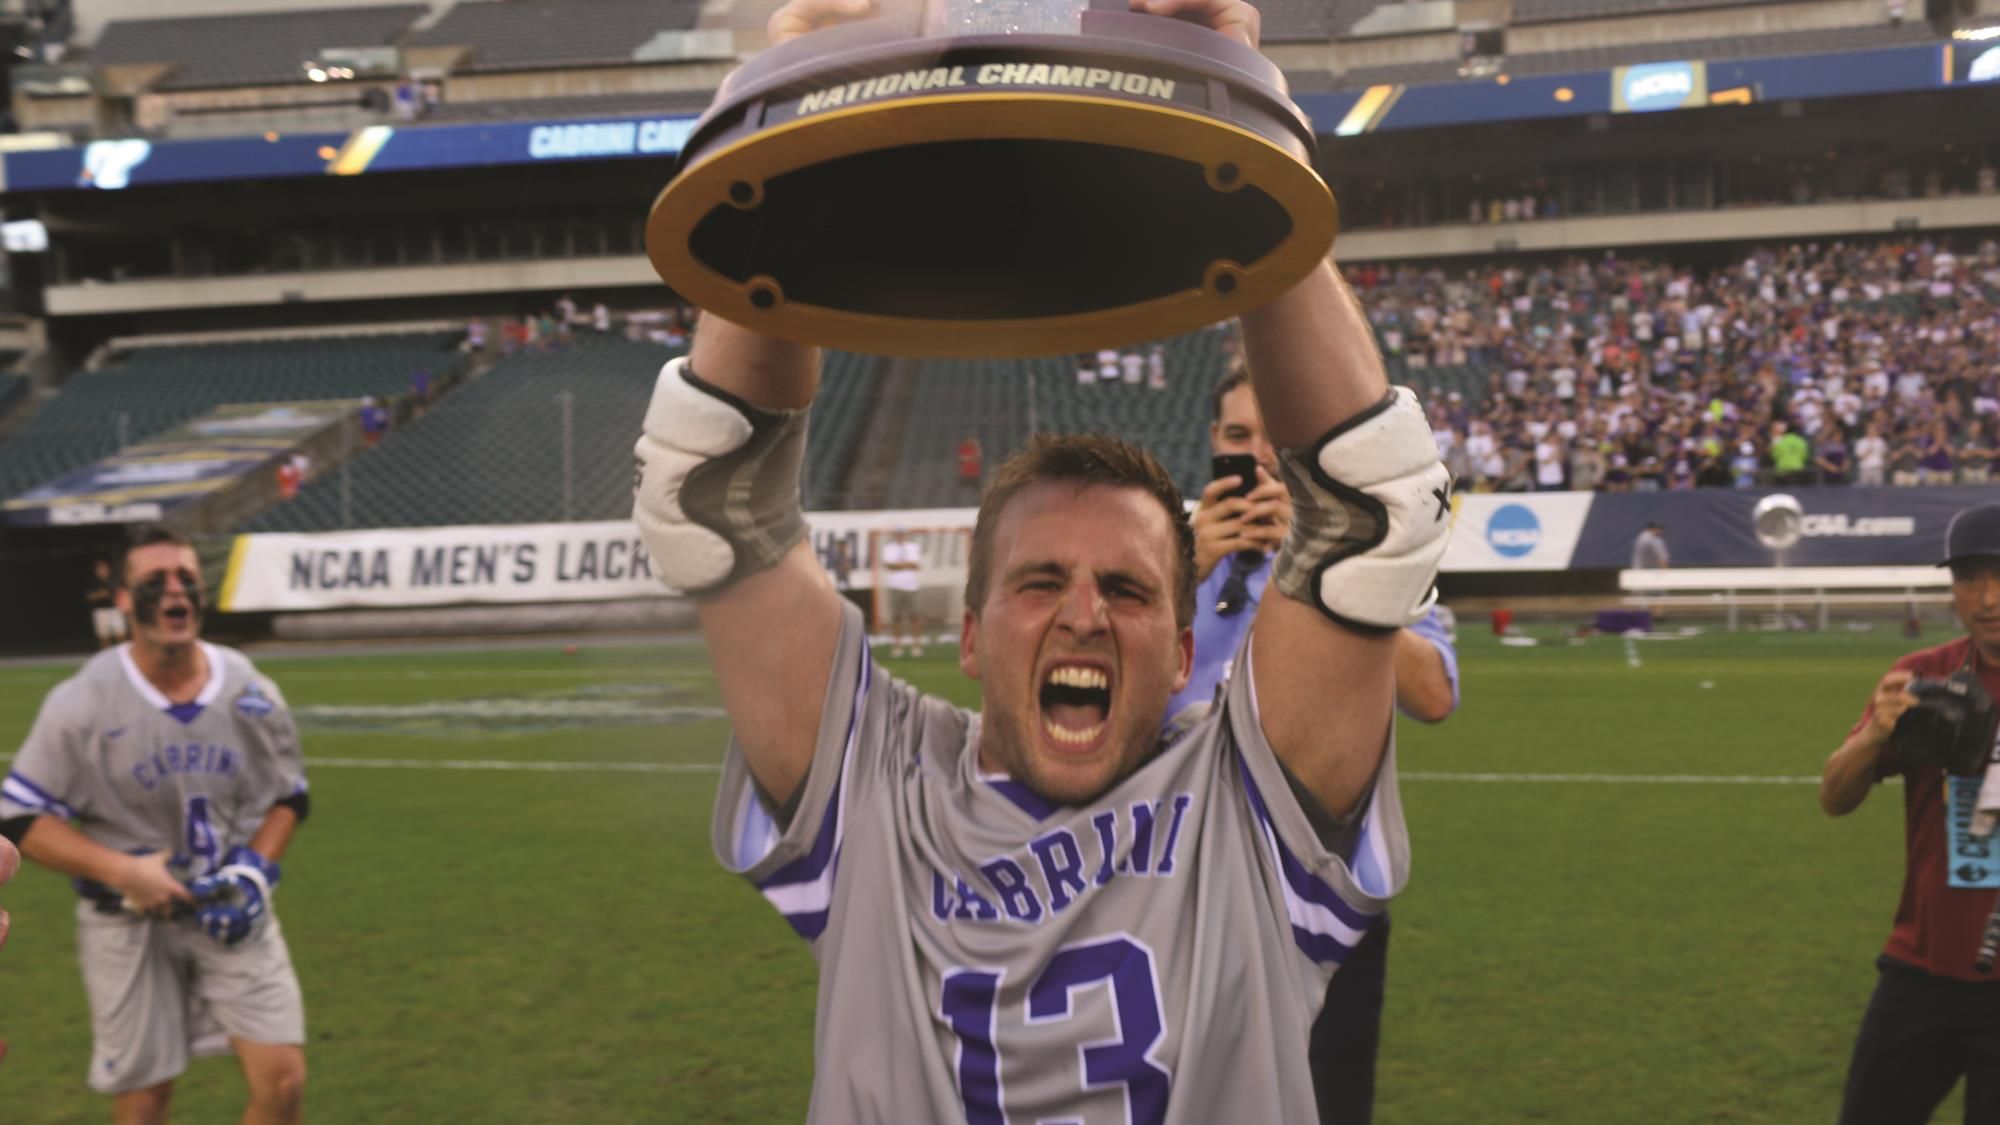 Timmy Brooks Celebrates after winning the 2019 NCAA mens lacrosse tournament 2019- photo by Cabrini Athletics 